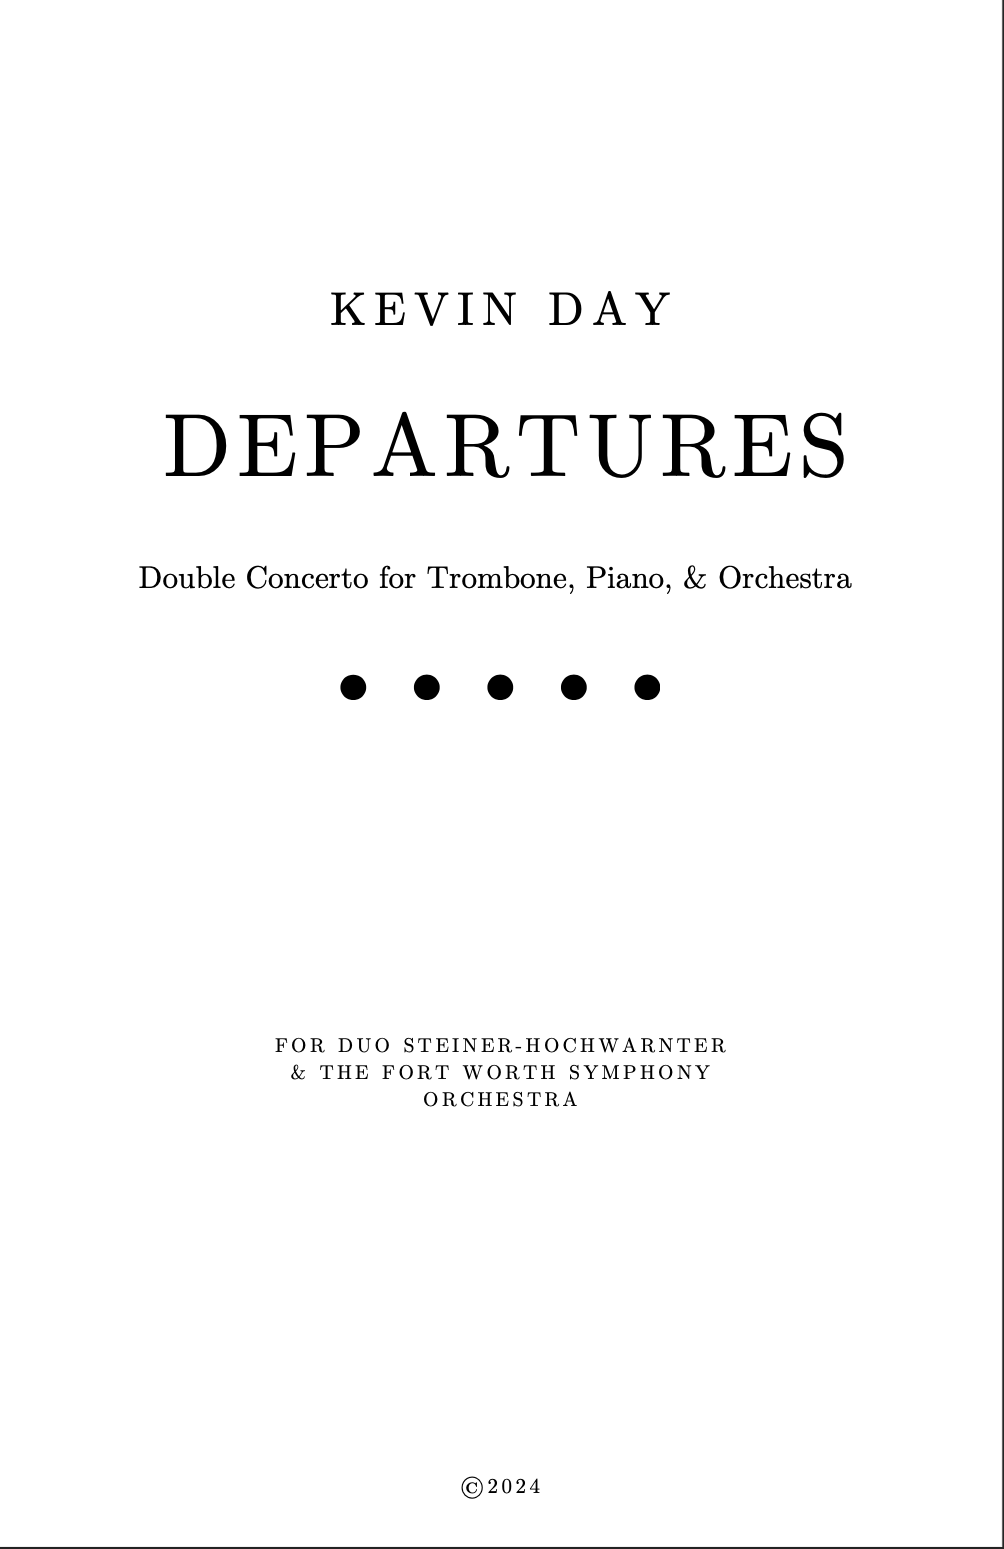 Departures by Kevin Day